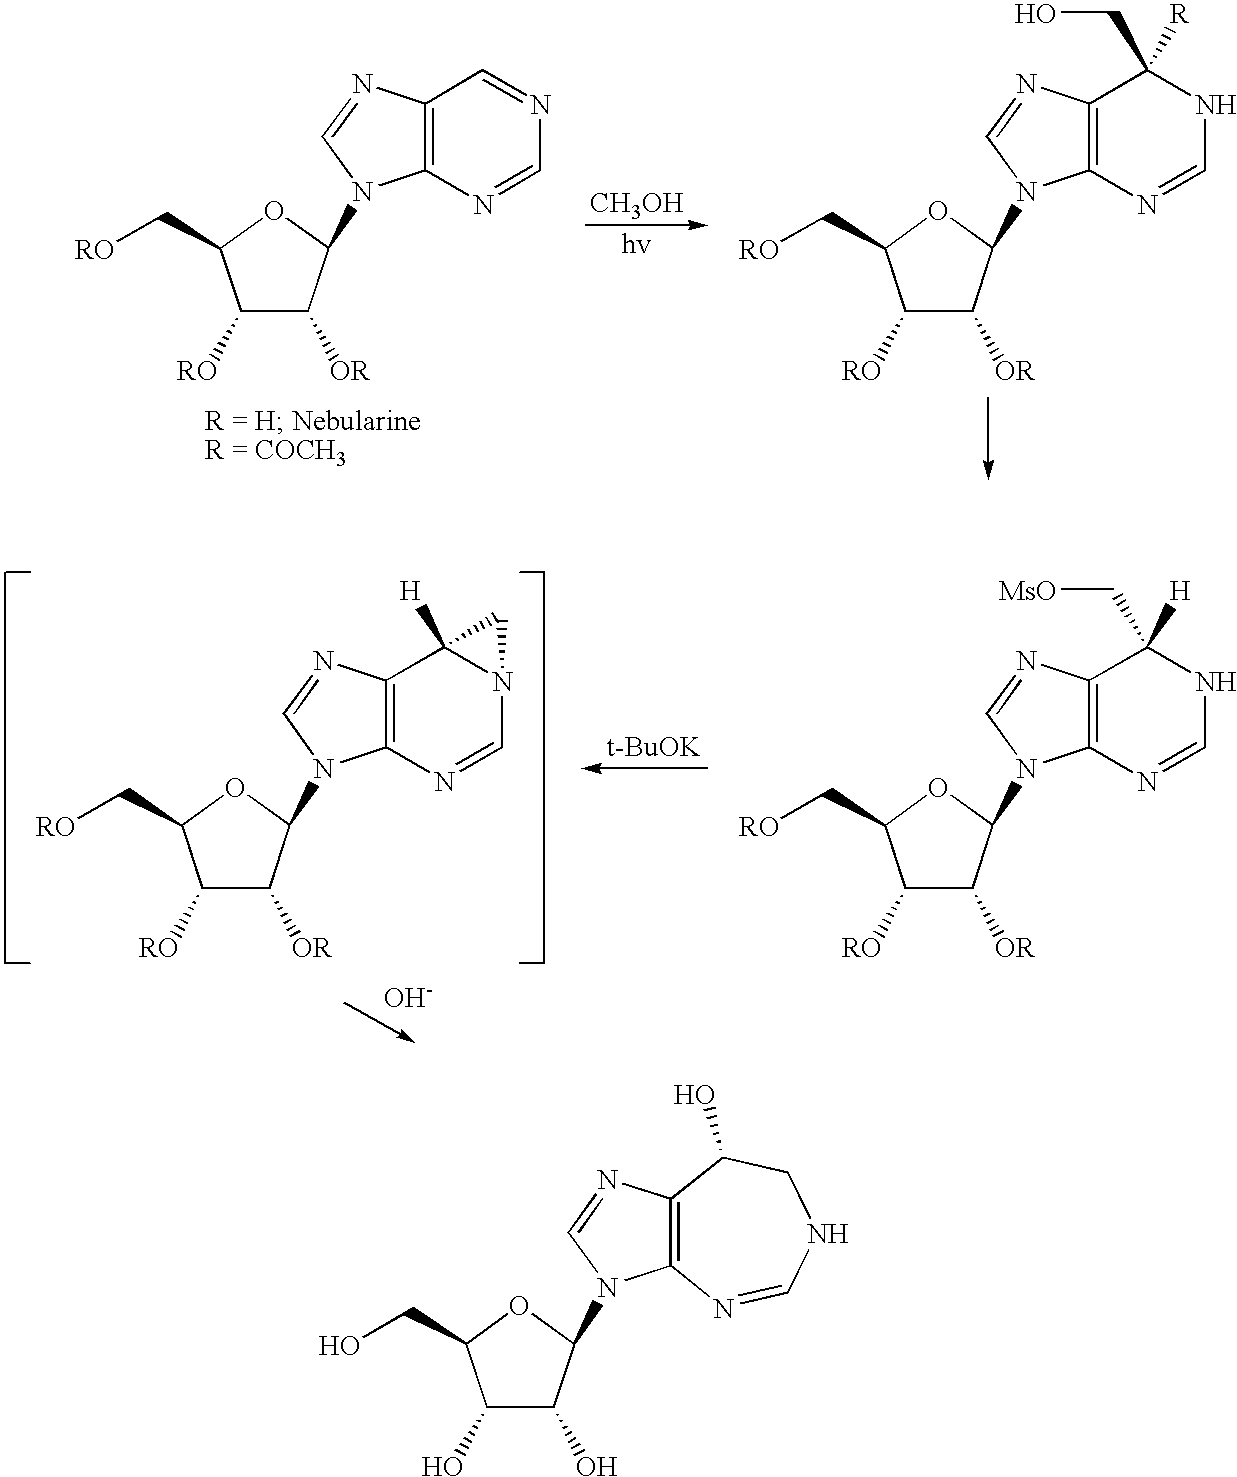 Process for the production of pentostatin aglycone and pentostatin